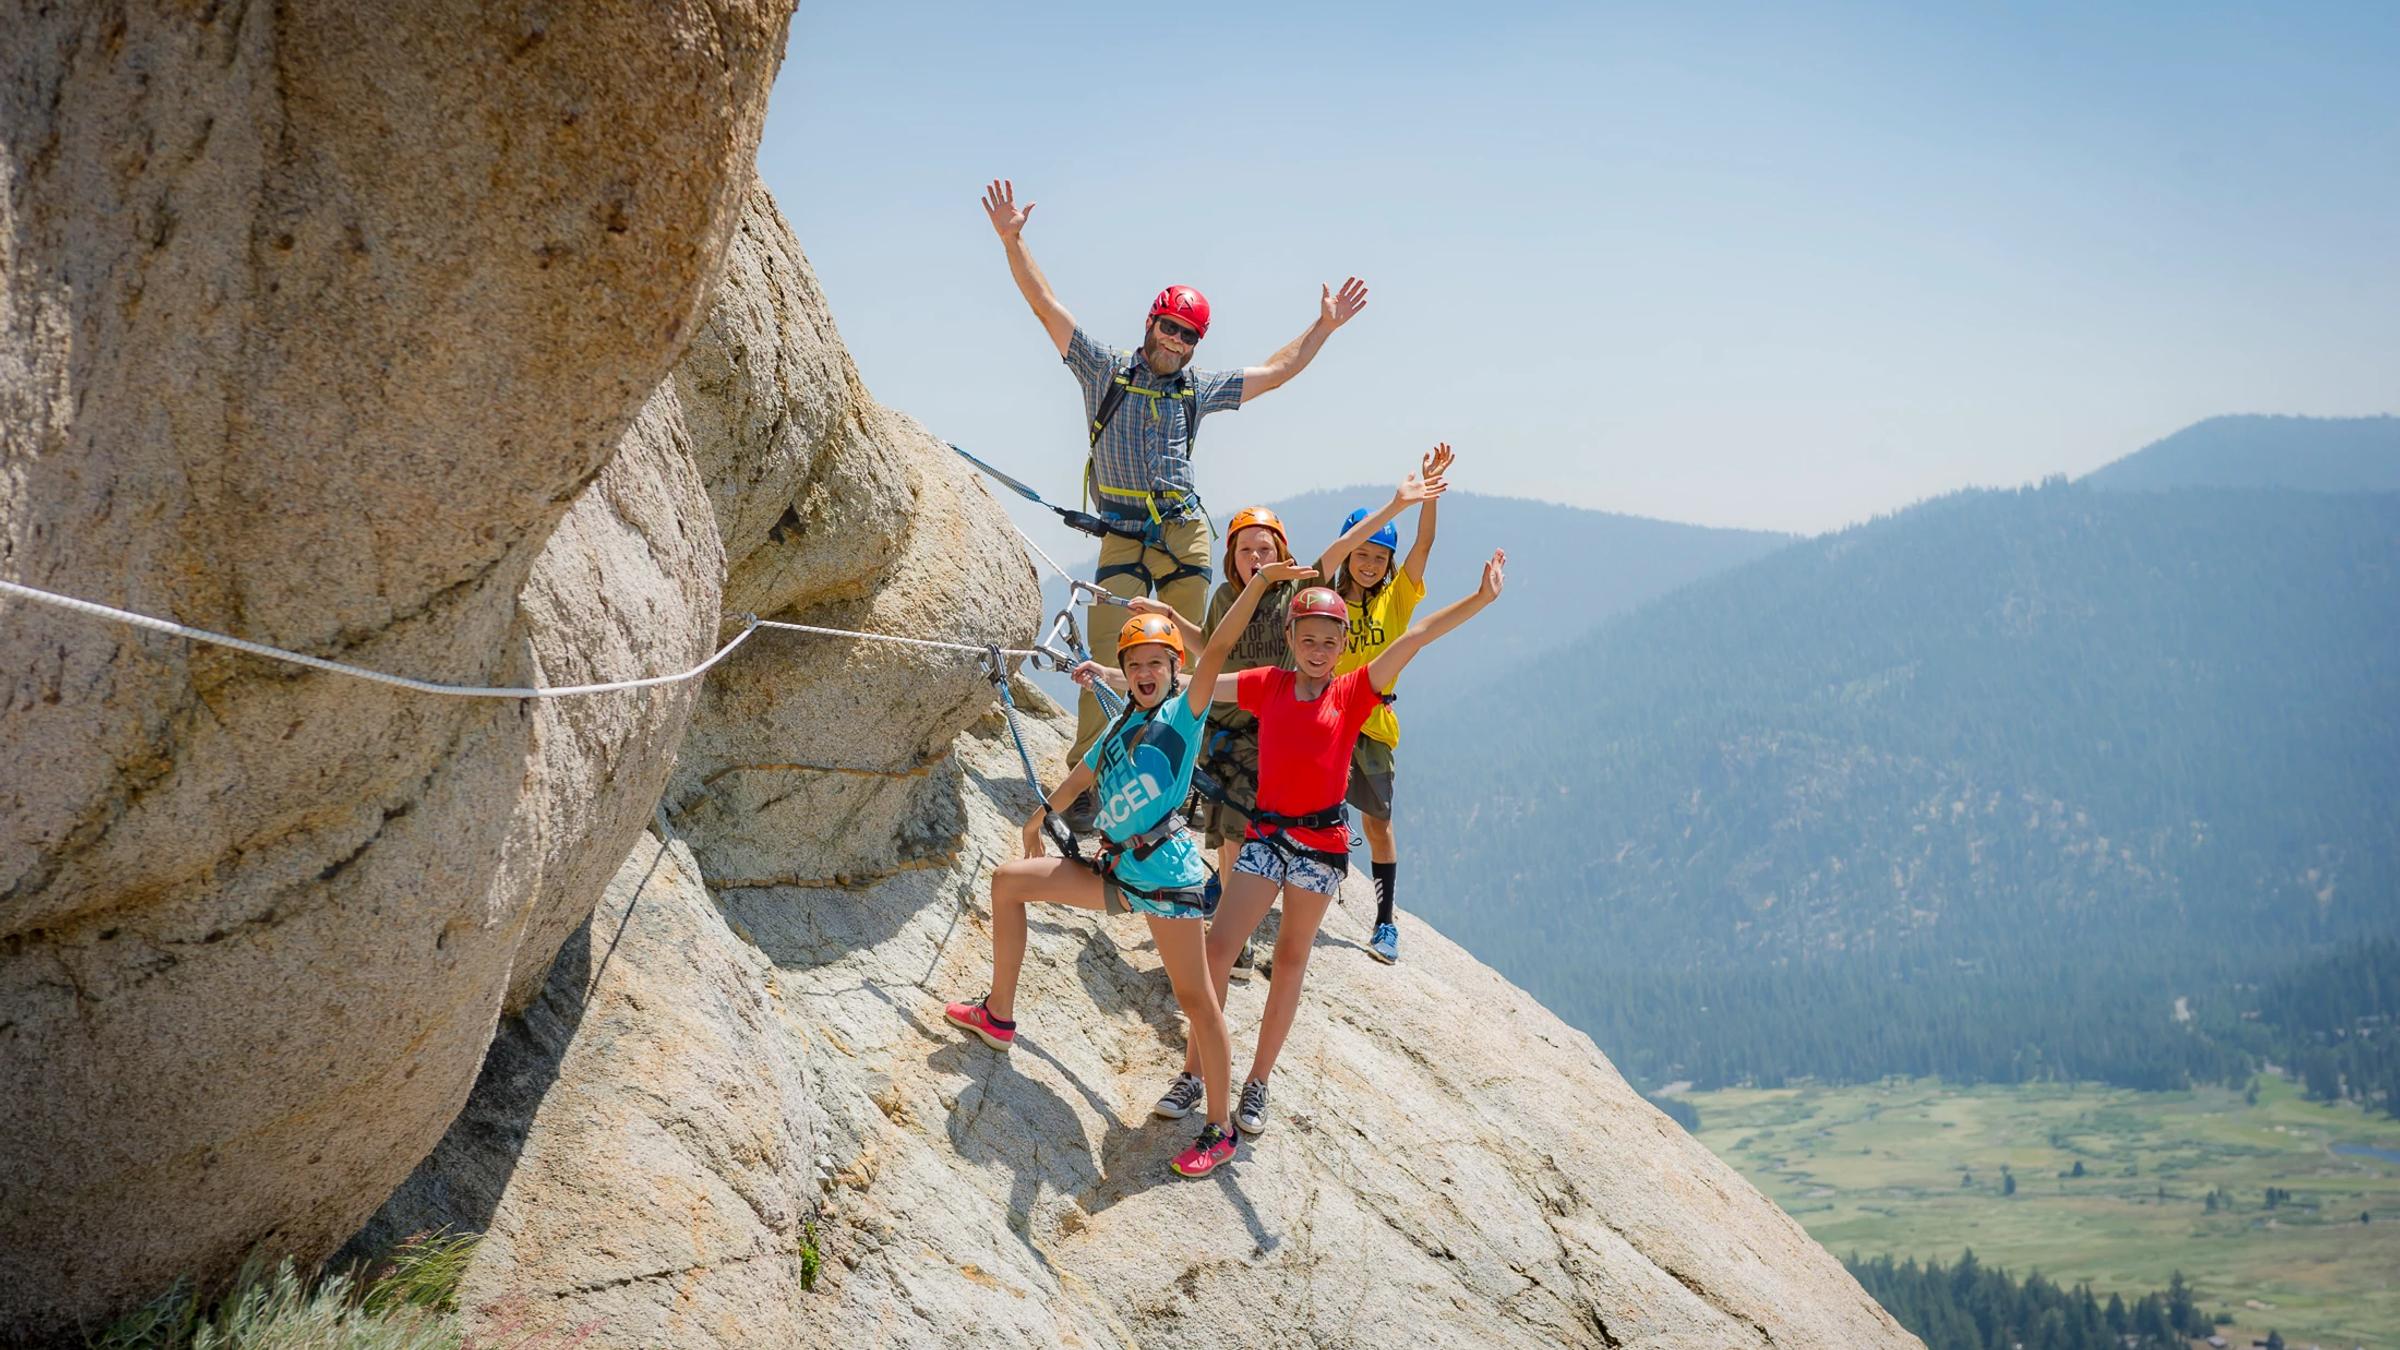 Four kids are guided up Tram Face on the Via Ferrata